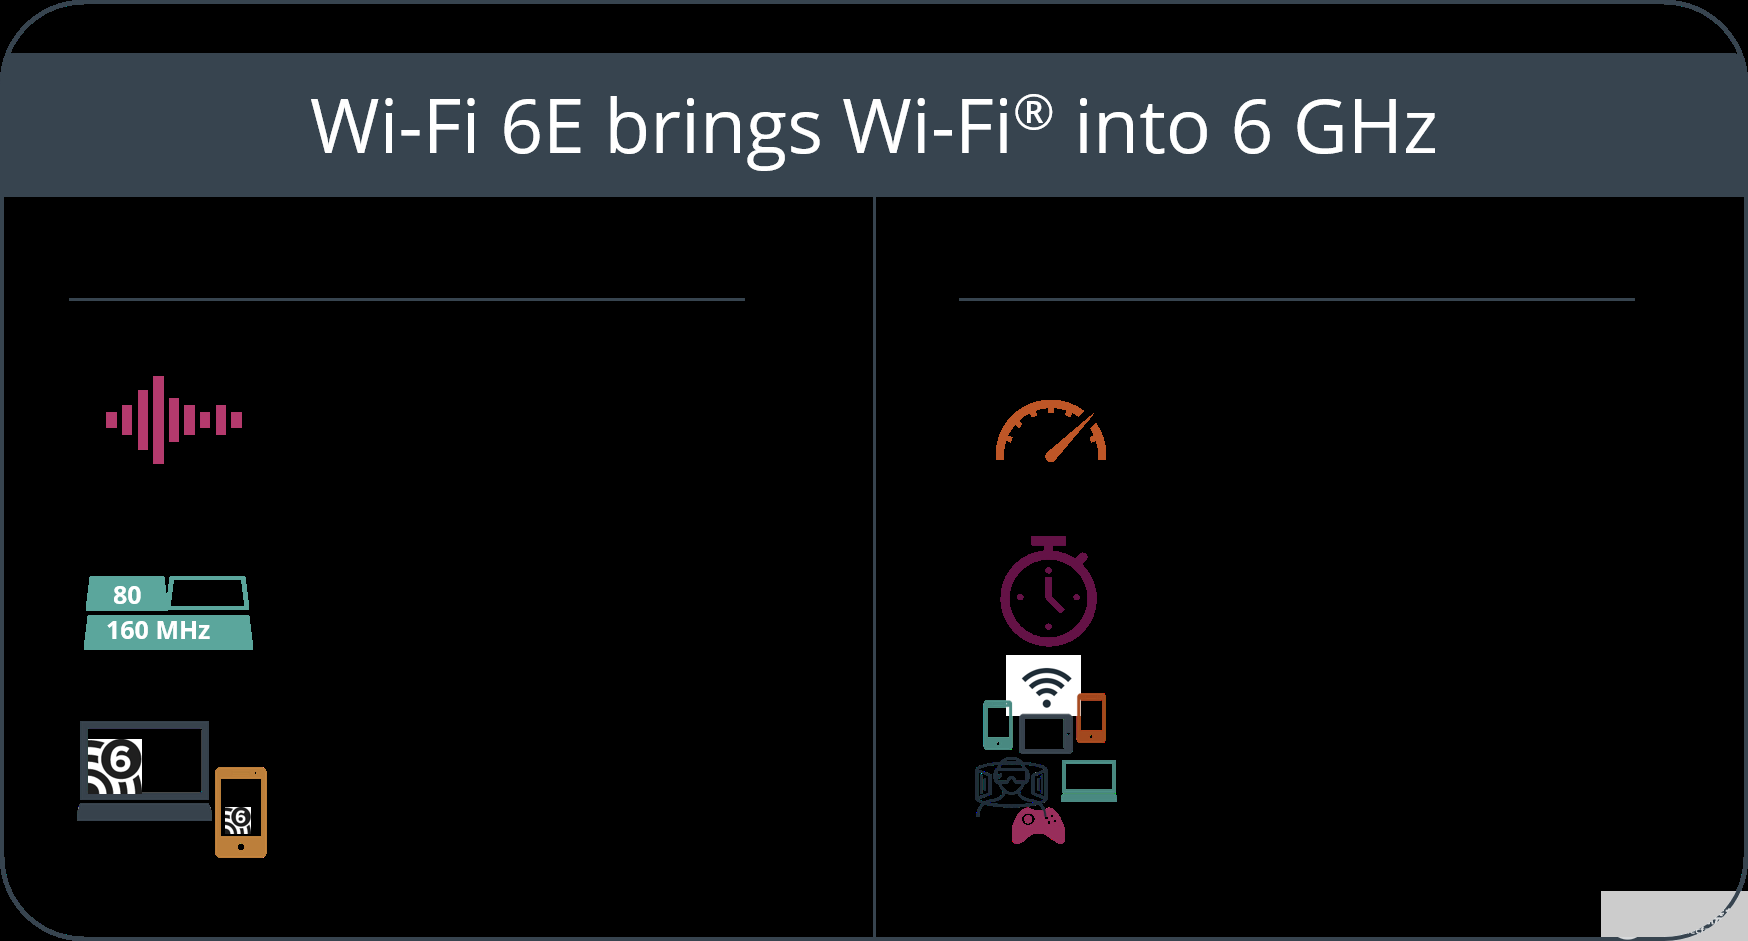 Wi-Fi 6E features and benefits